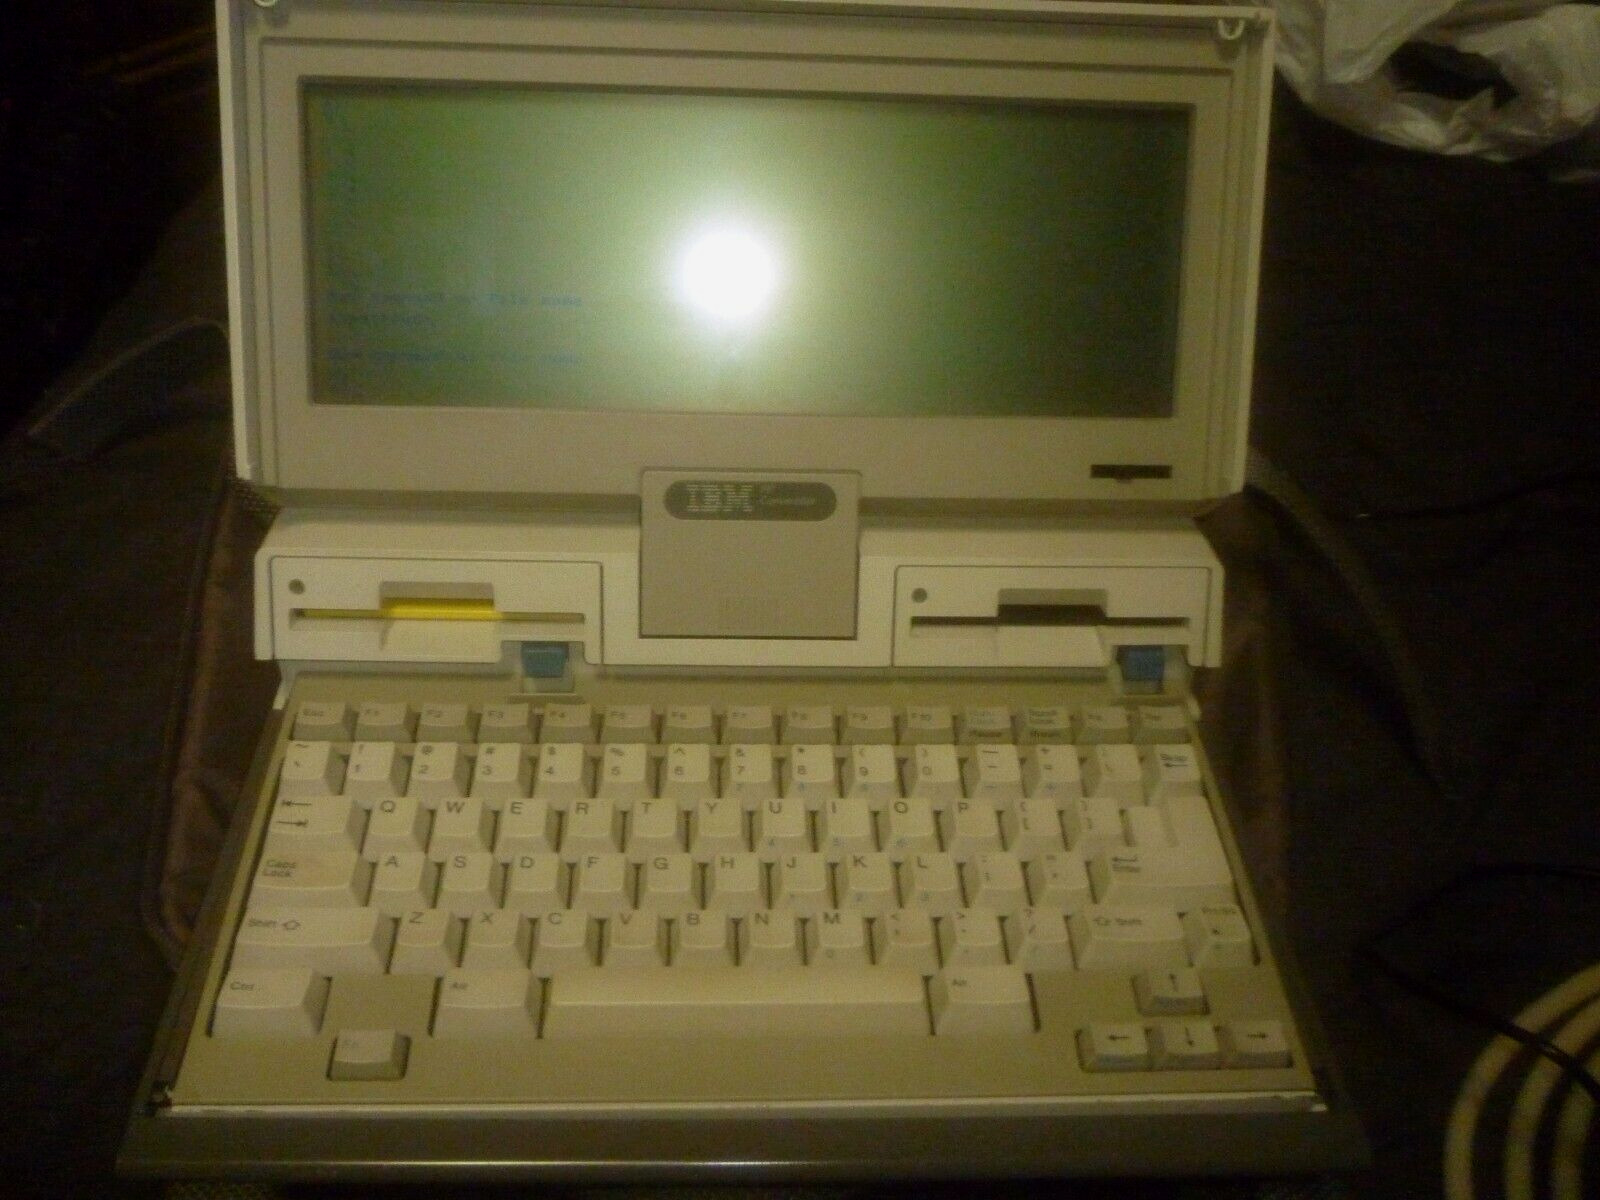 IBM 5140 PC Convertible Vintage Portable Computer - Used